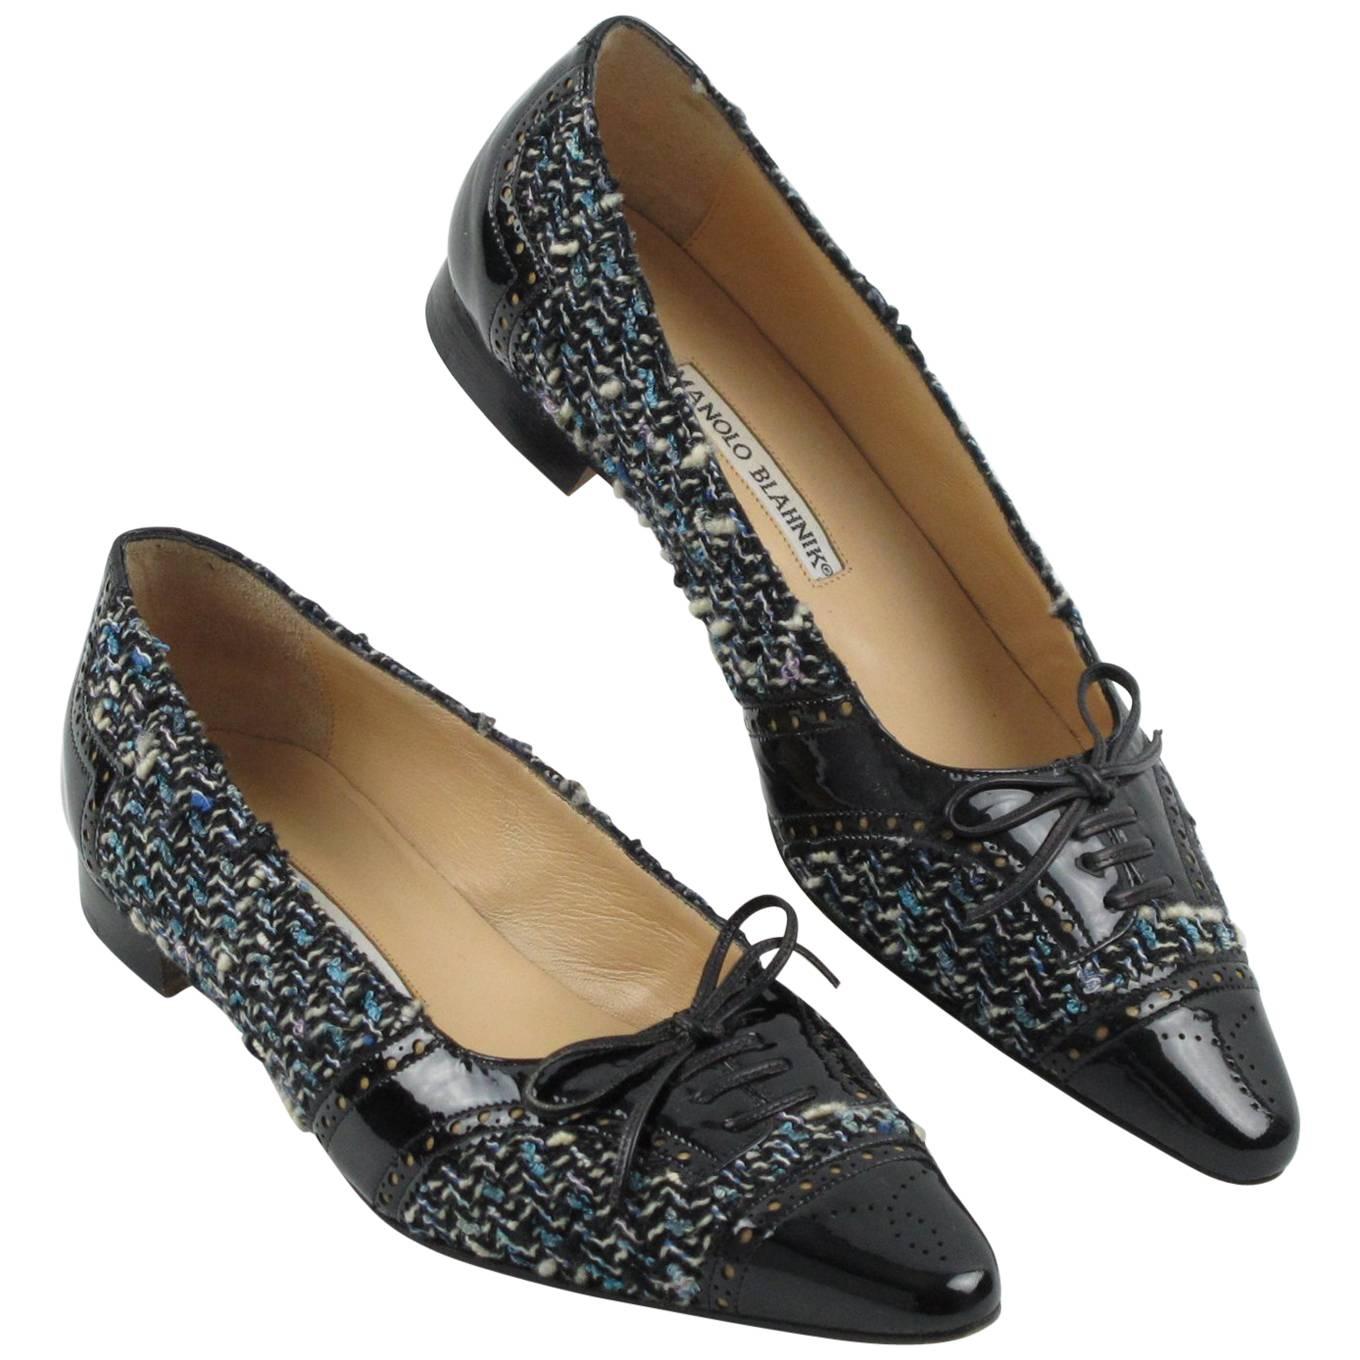 Manolo Blahnik Black Patent Leather and Tweed Fabric Flats Shoes Size 37.5 / 7.5